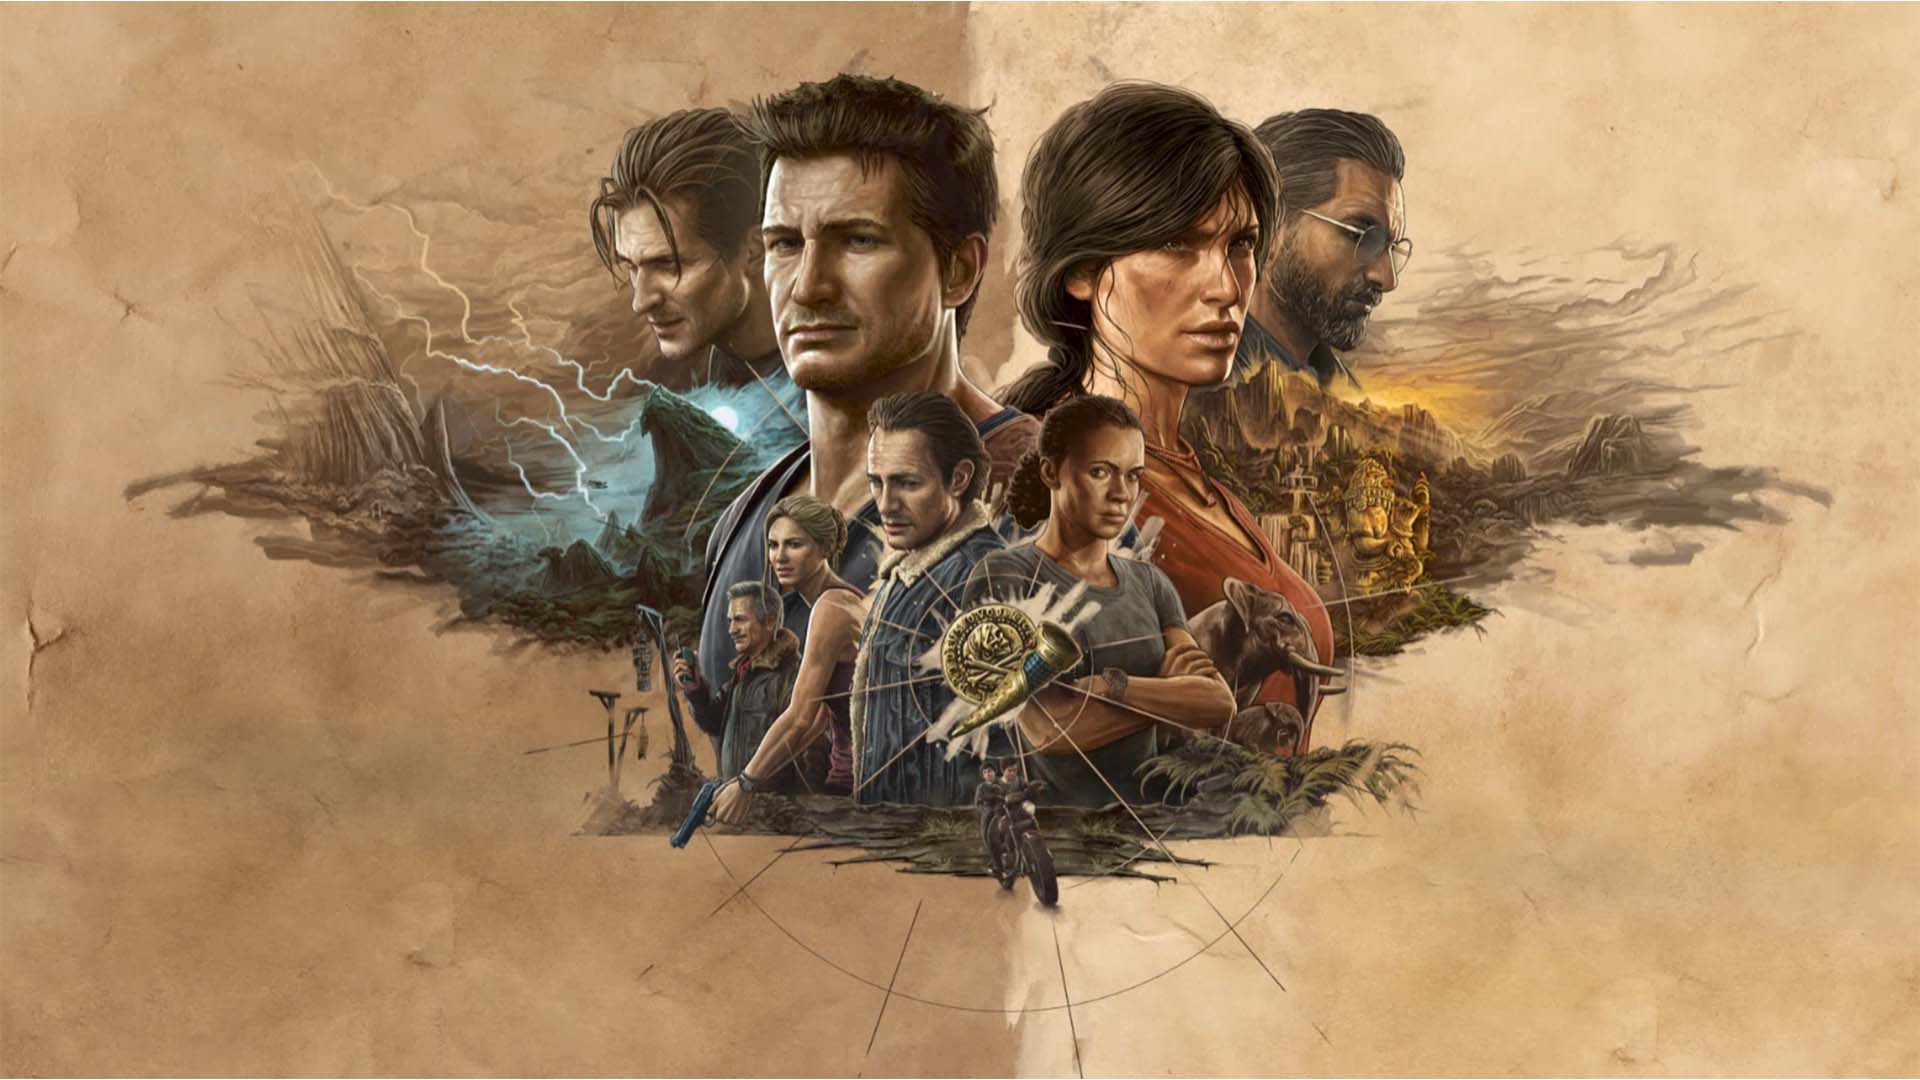 Uncharted: Legacy of Thieves Collection Steam Deck and PC review